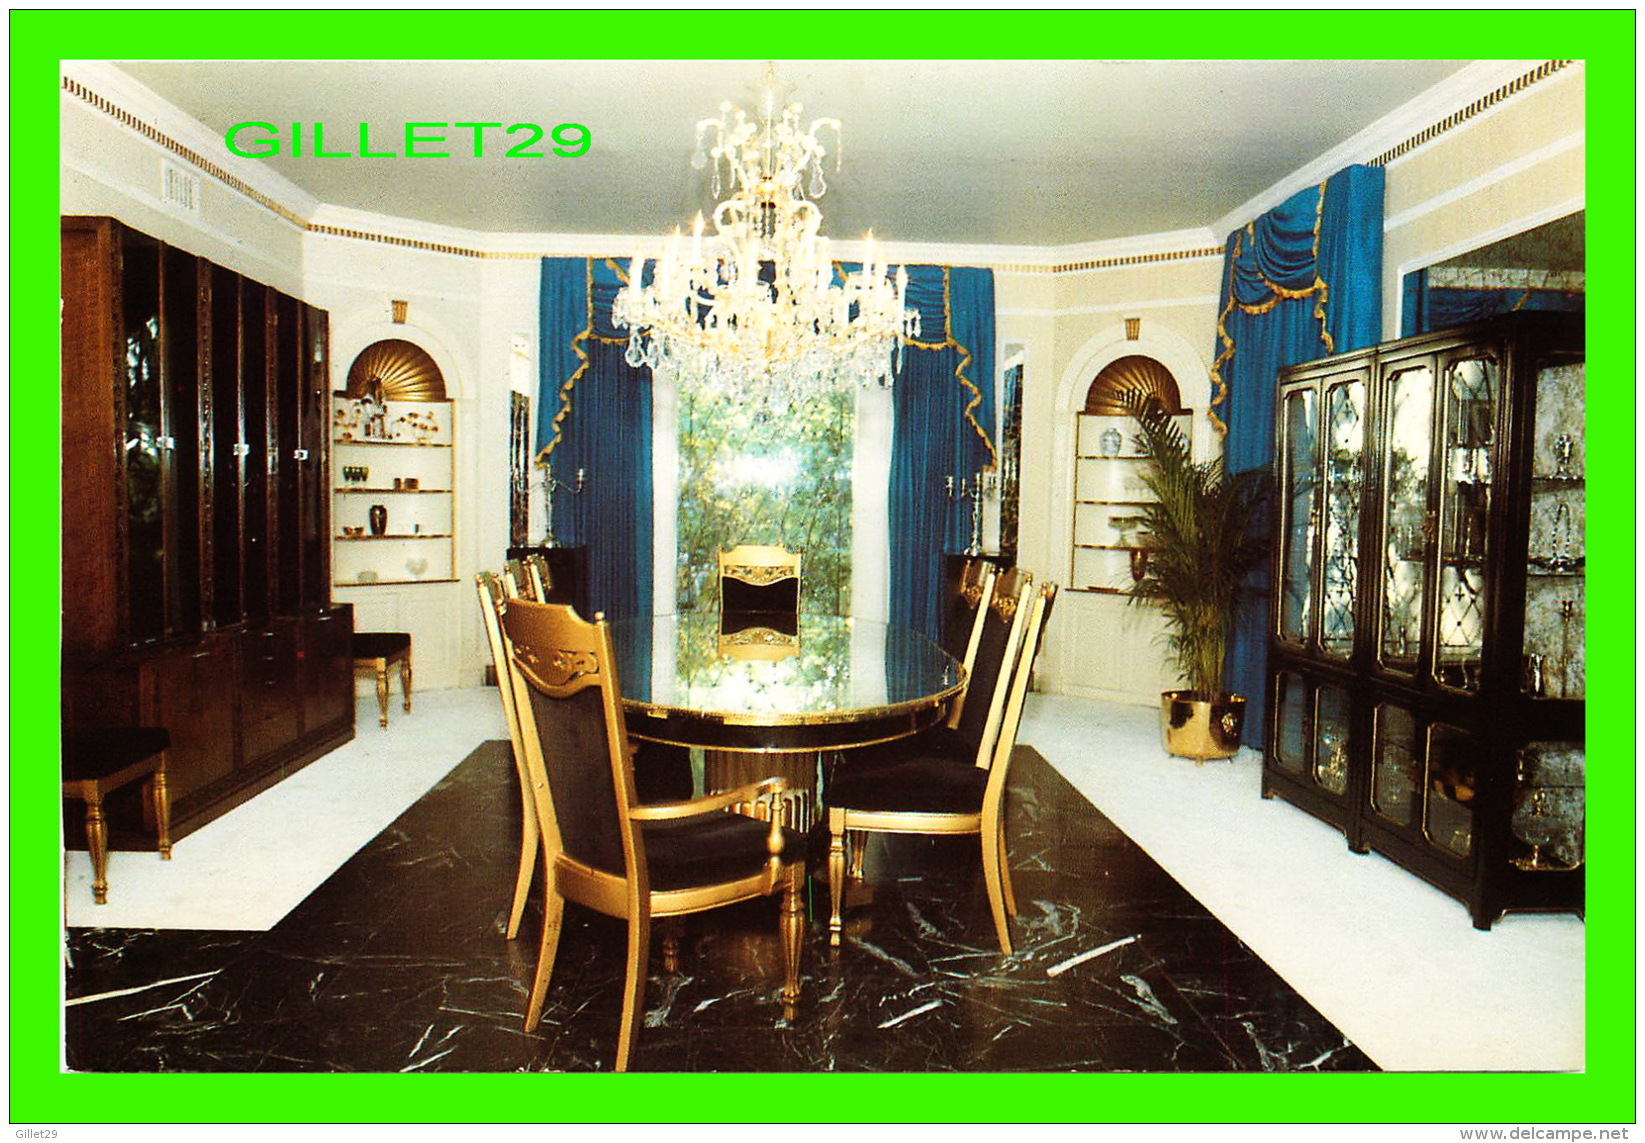 MEMPHIS, TN - GRACELAND MANSION, THE HOME OF ELVIS PRESLEY - THE DINING ROOM - - Memphis